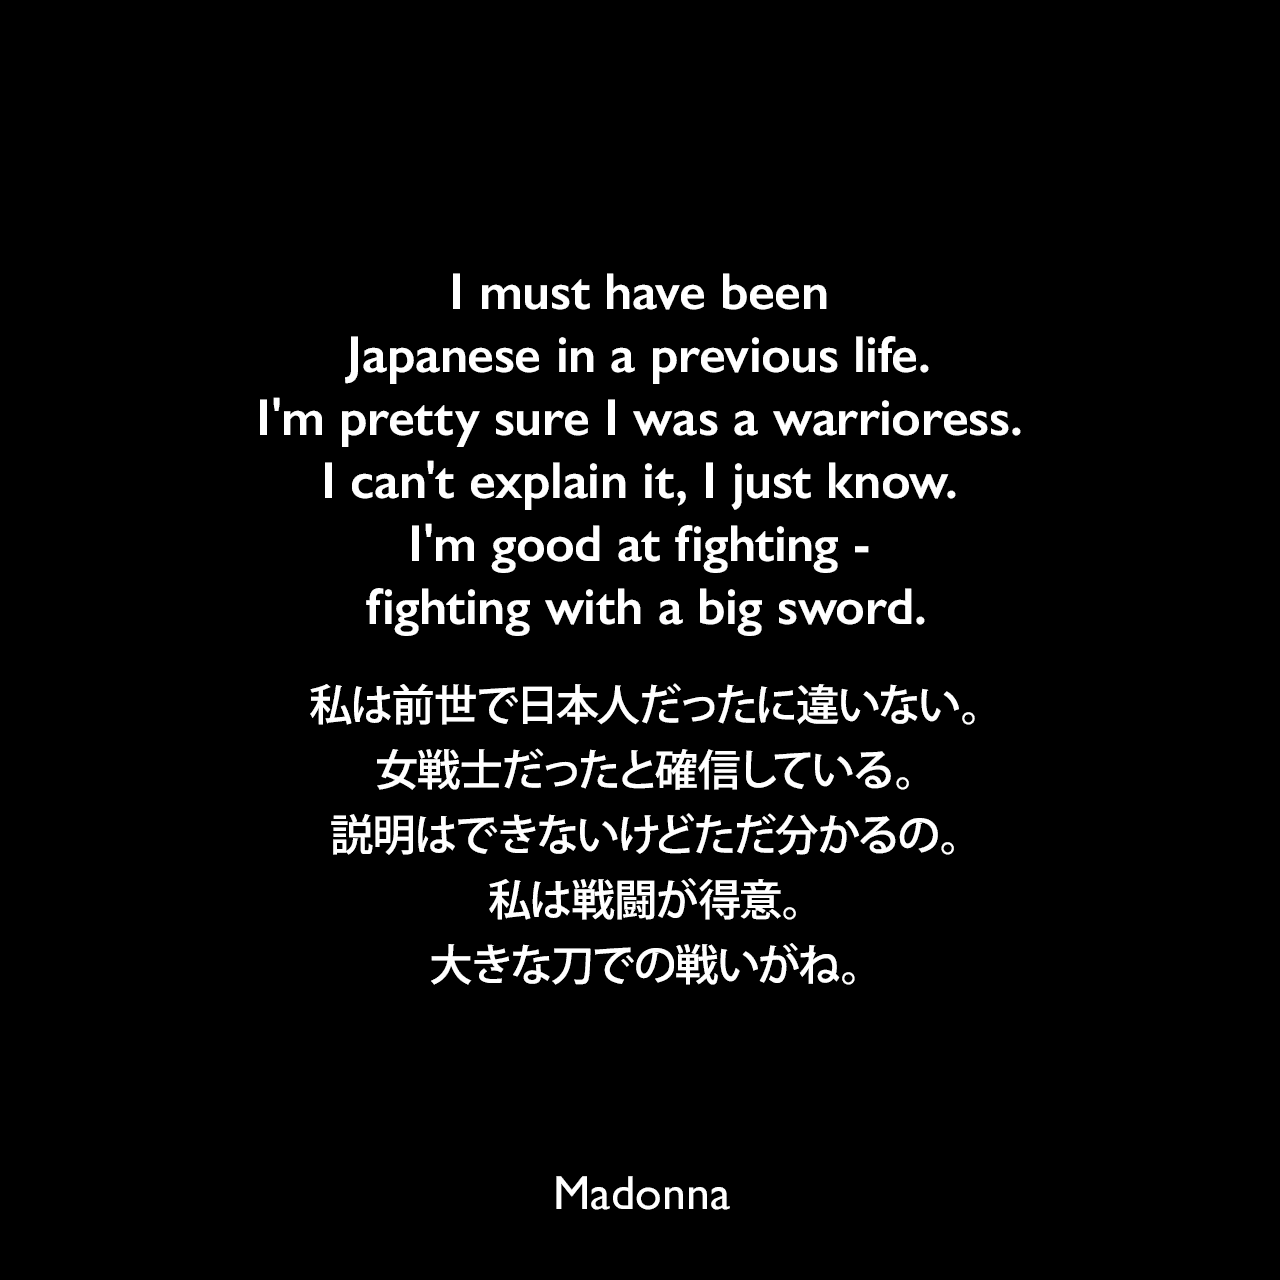 I must have been Japanese in a previous life. I'm pretty sure I was a warrioress. I can't explain it, I just know. I'm good at fighting - fighting with a big sword.私は前世で日本人だったに違いない。女戦士だったと確信している。説明はできないけどただ分かるの。私は戦闘が得意。大きな刀での戦いがね。- 2008年「femalefirst.com」でのマドンナの発言よりMadonna